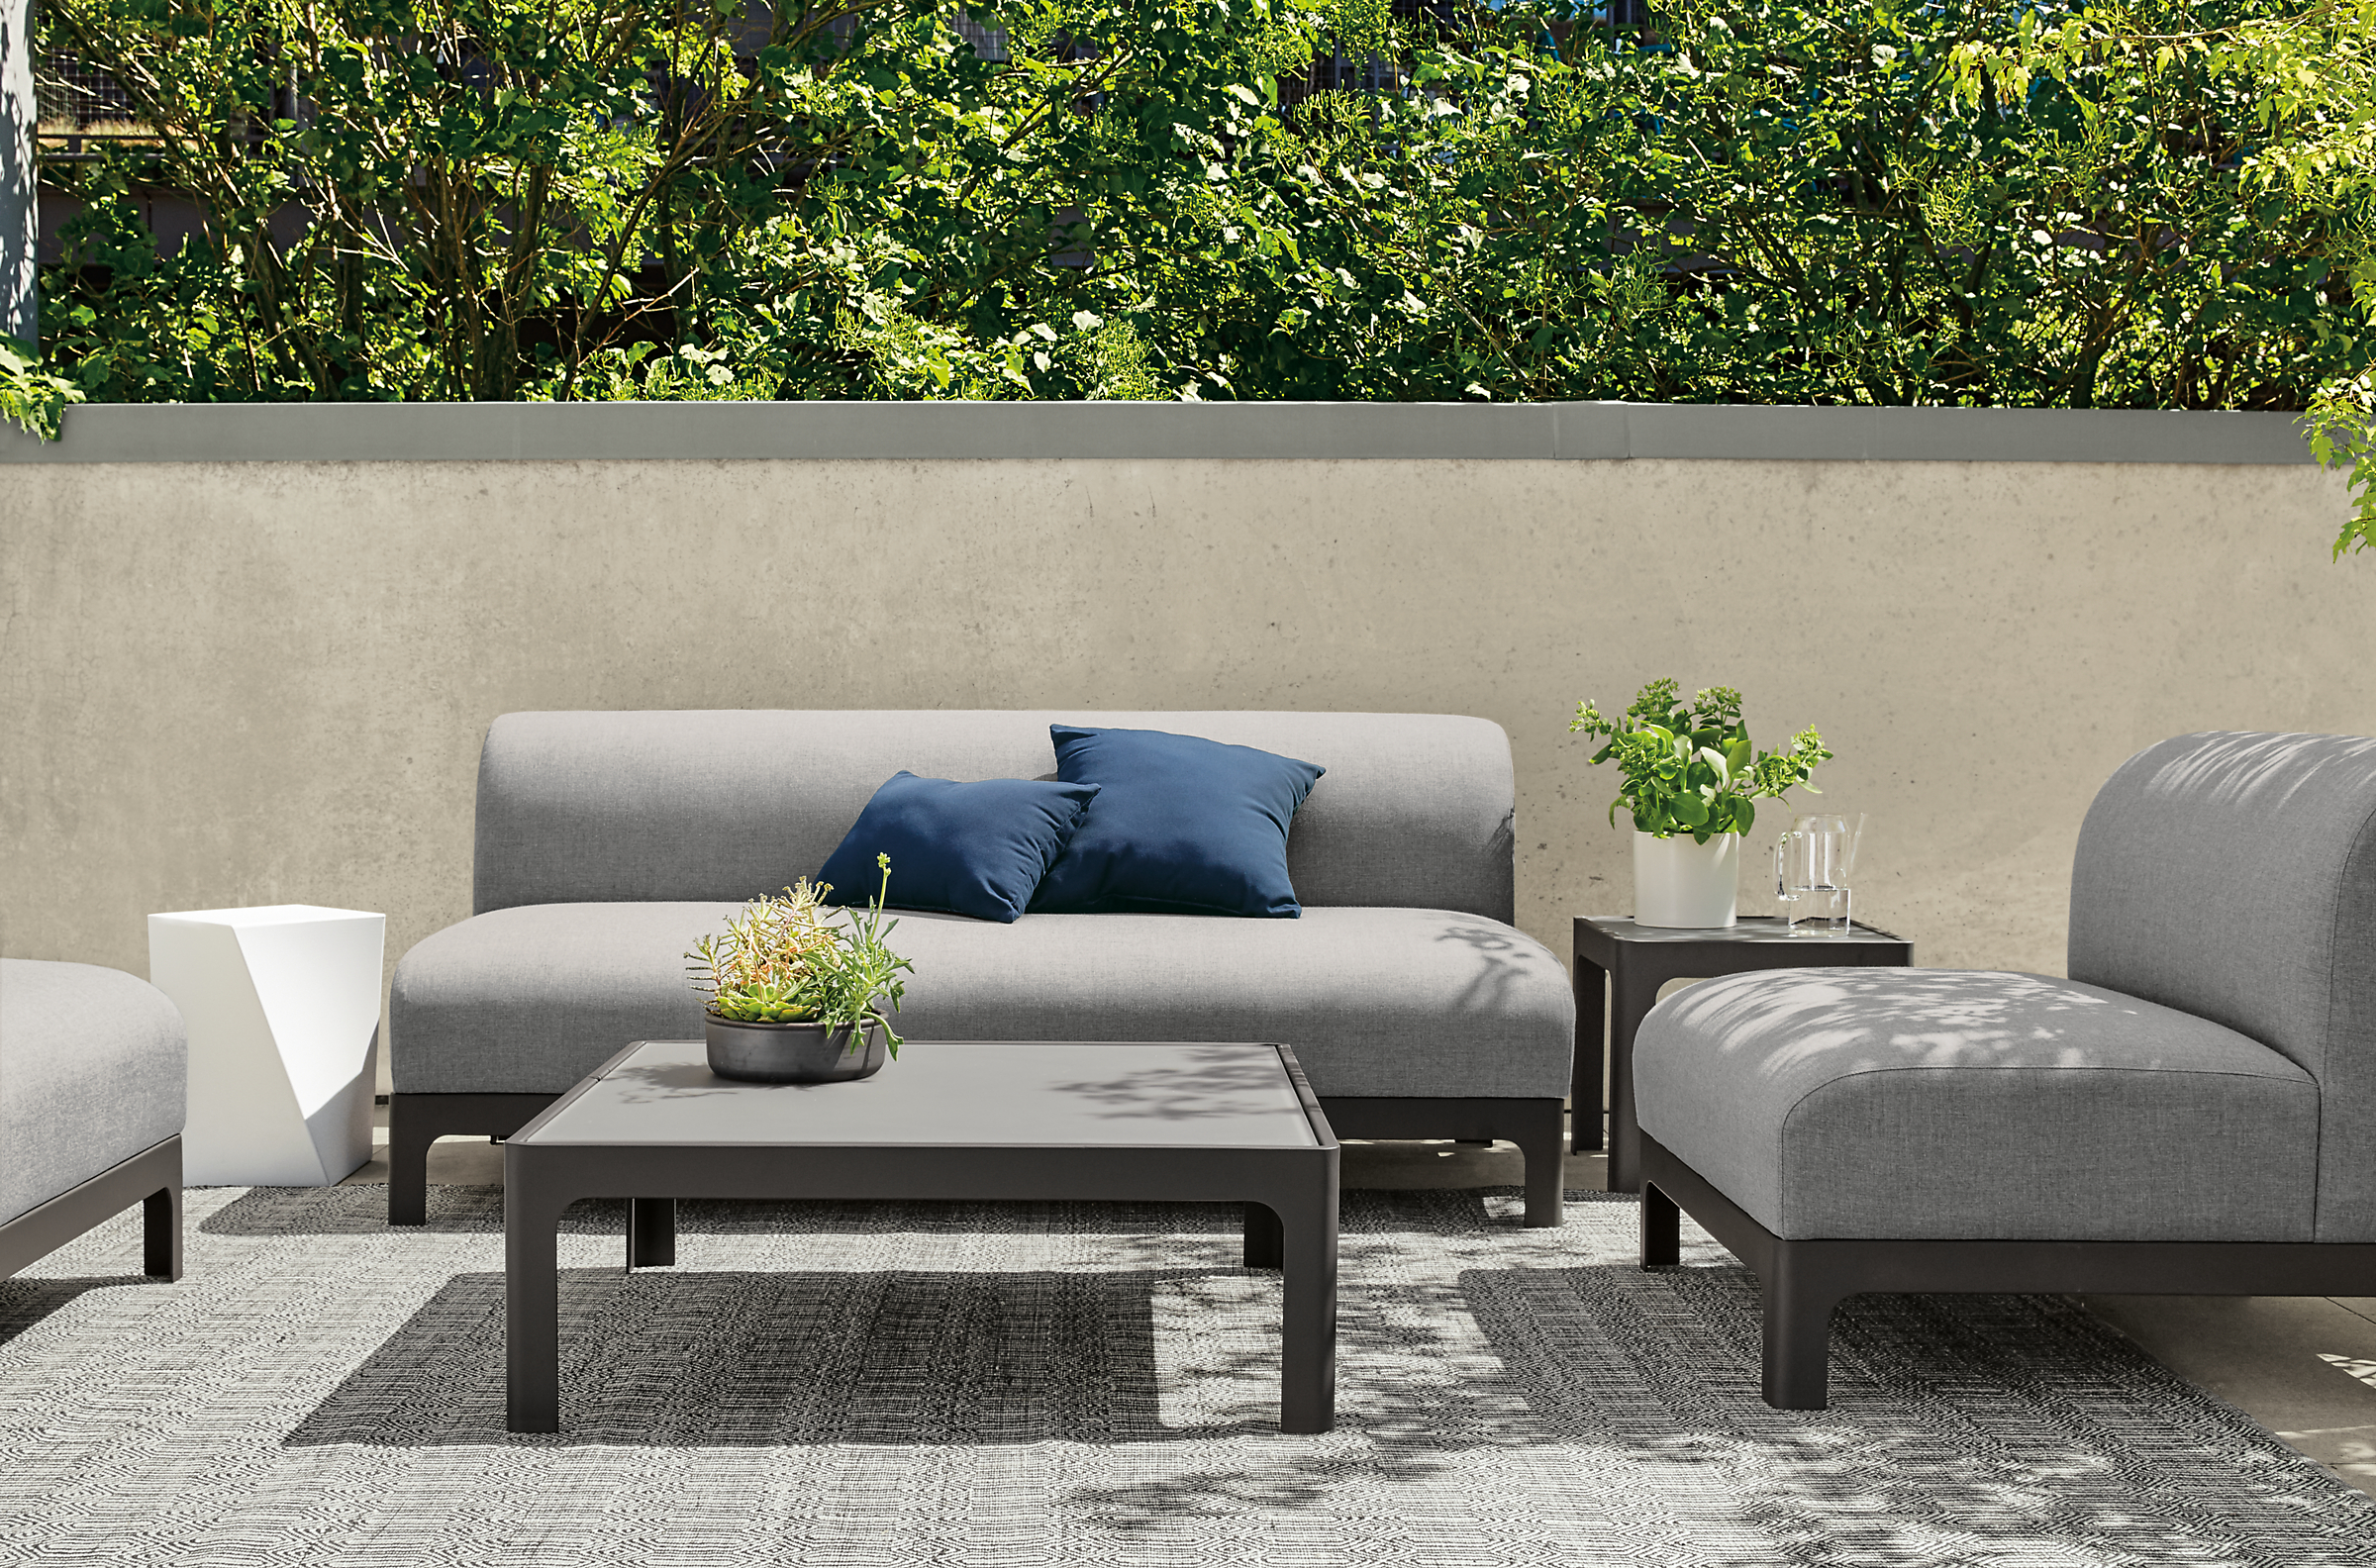 Outdoor Crescent sofa and chair on rug.